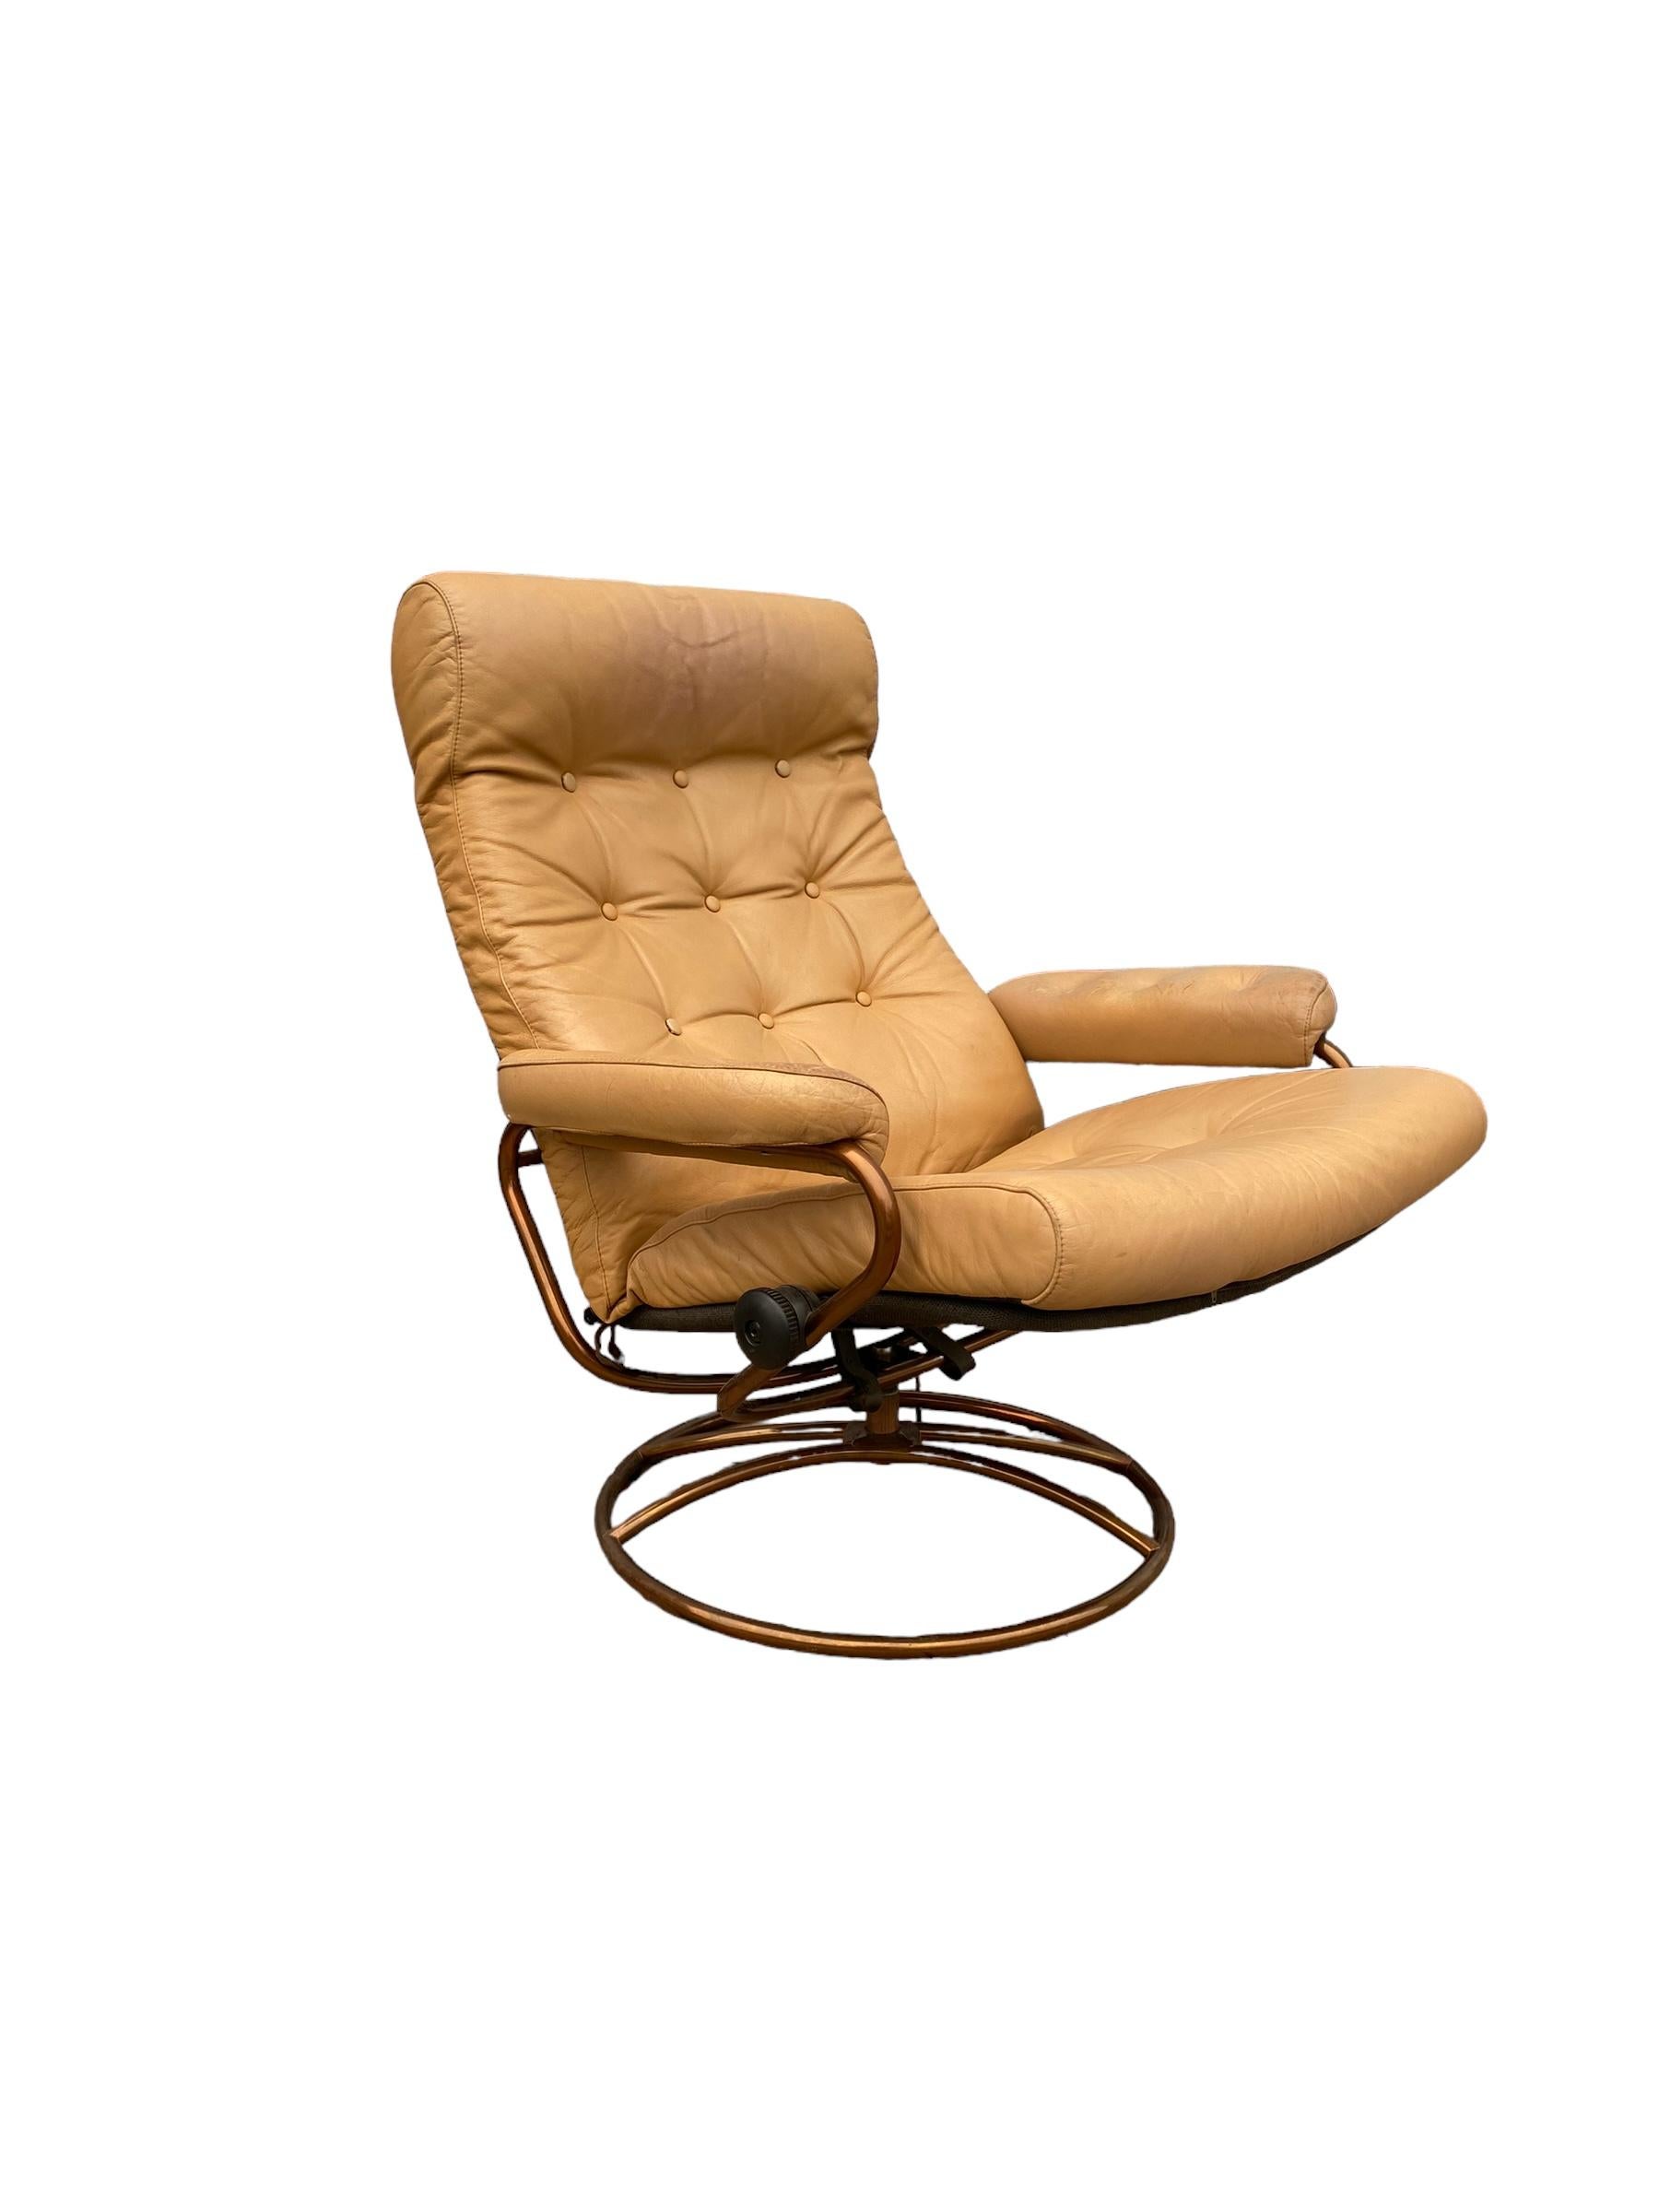 Scandinavian Modern Ekornes Stressless Reclining Lounge Chair and Ottoman in Cream with Copper Frame